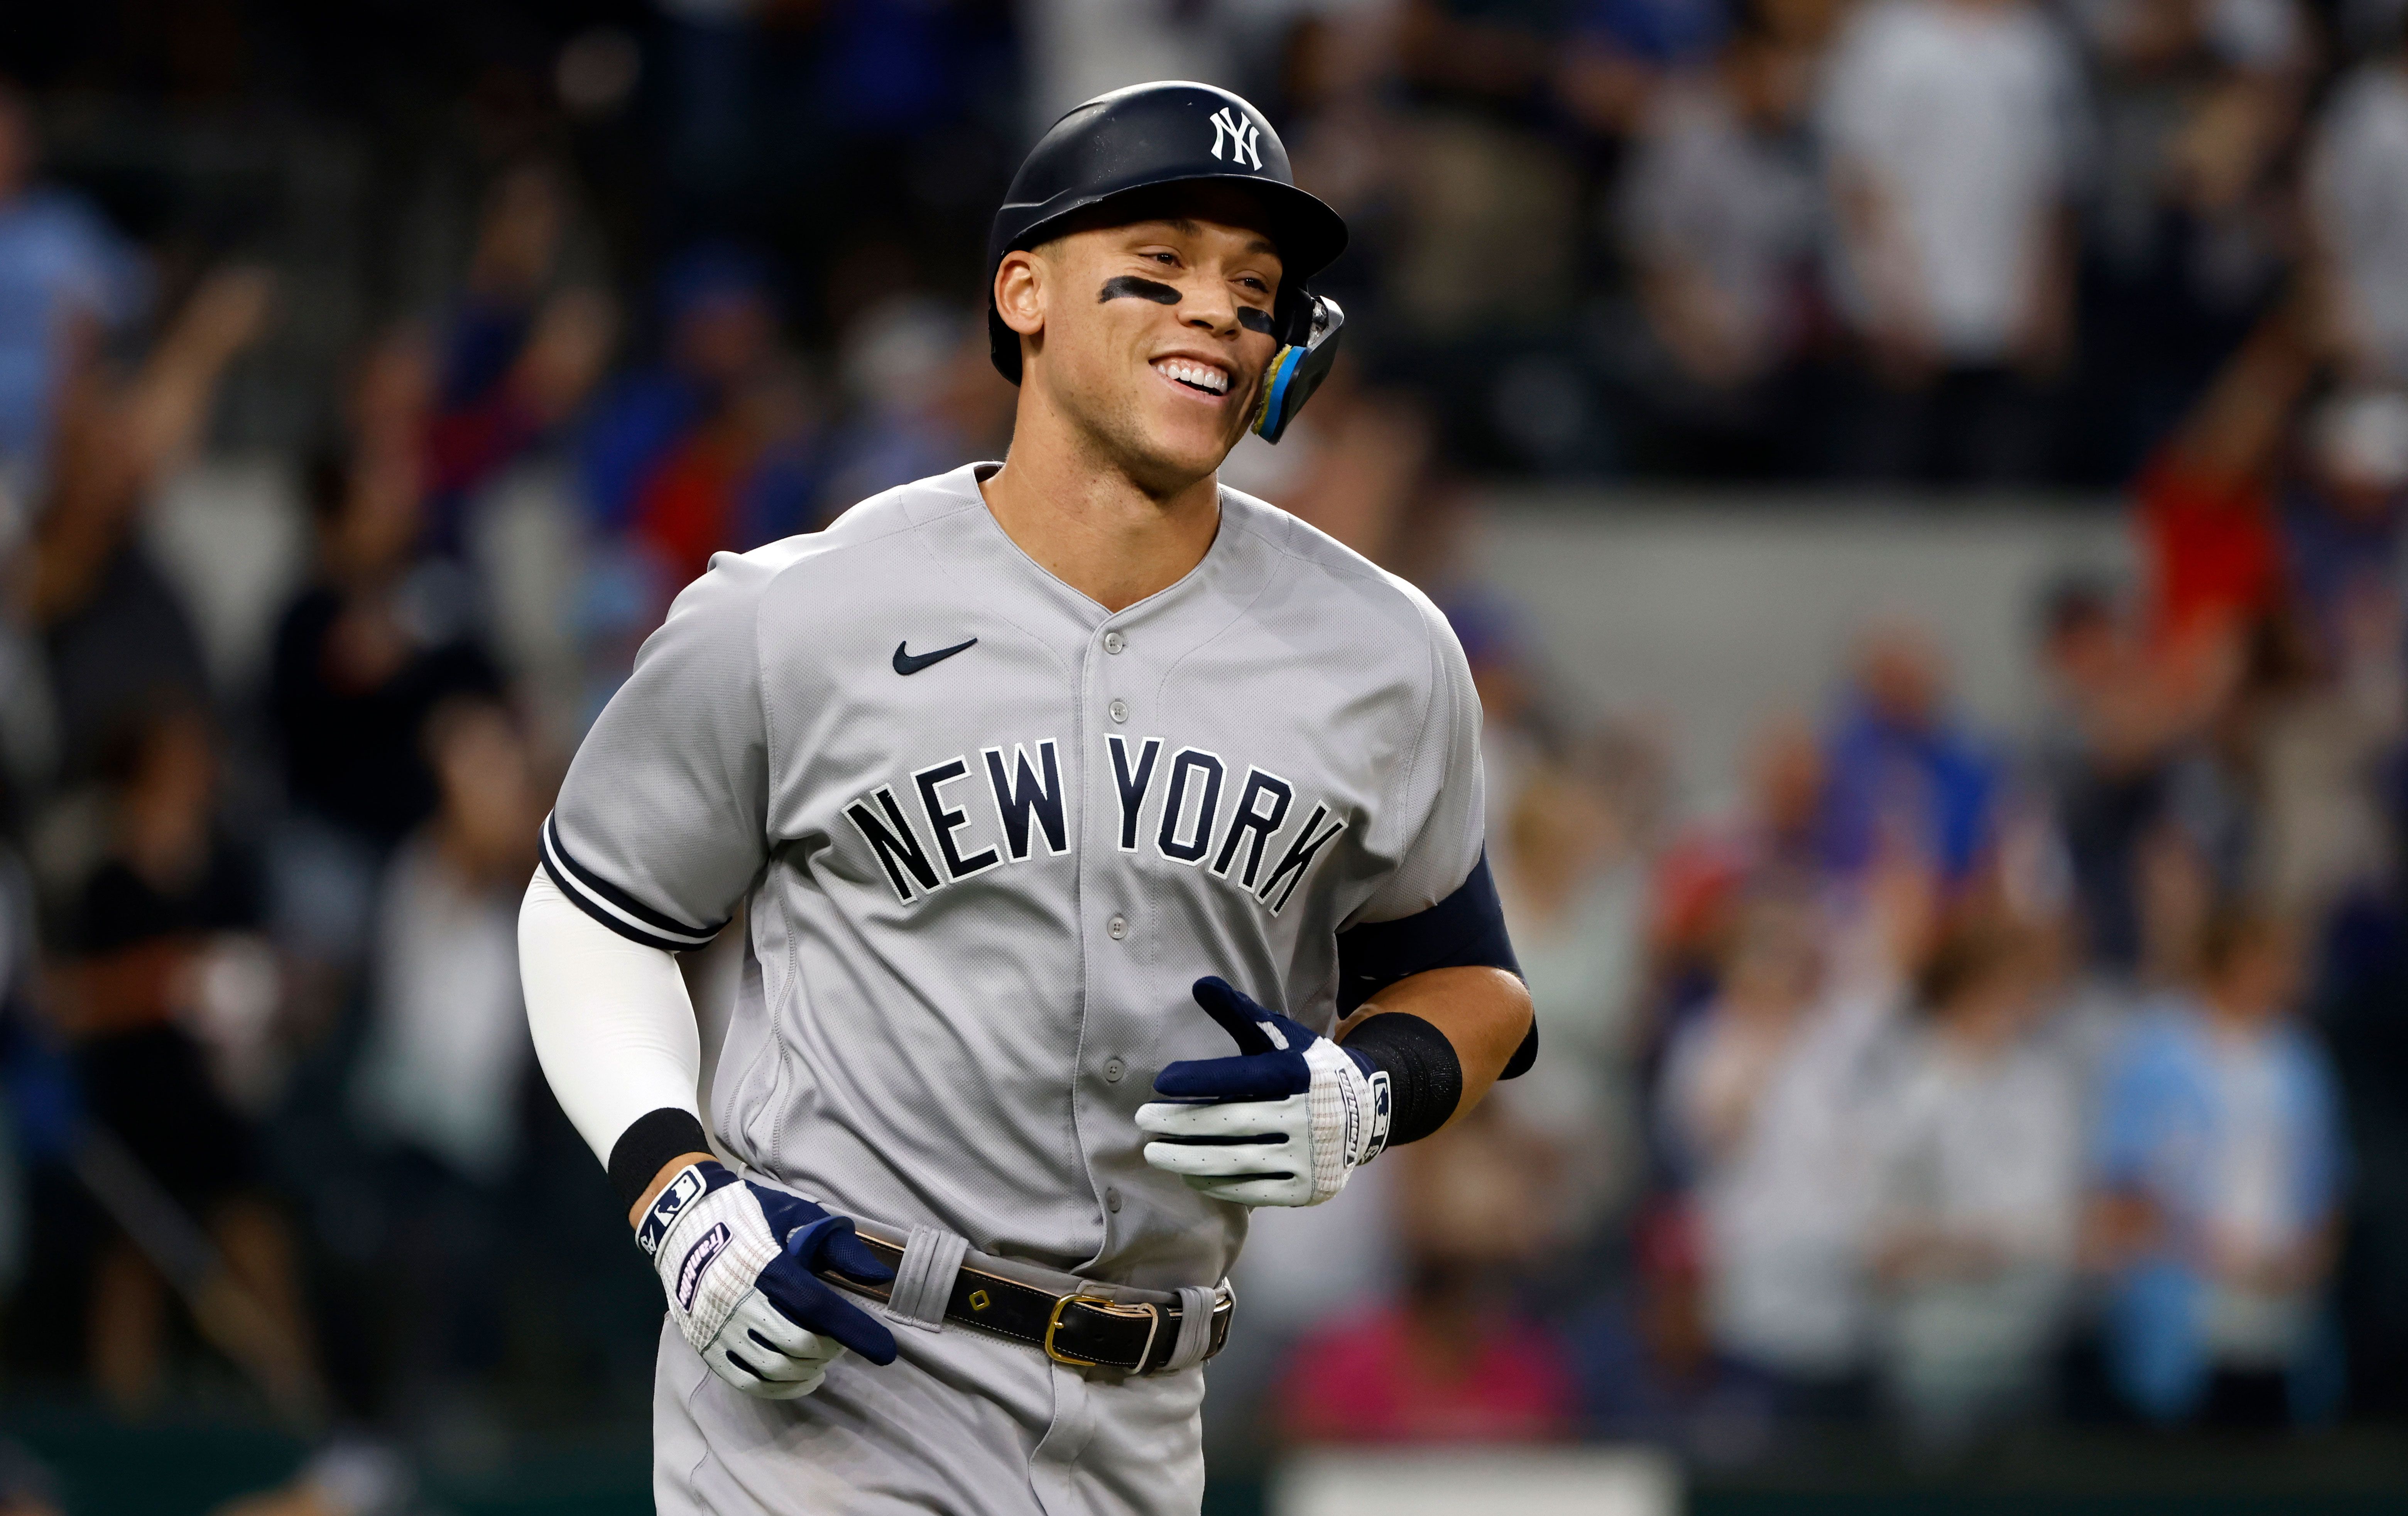 Yankees' Aaron Judge, others reportedly in COVID-19 protocol; Red